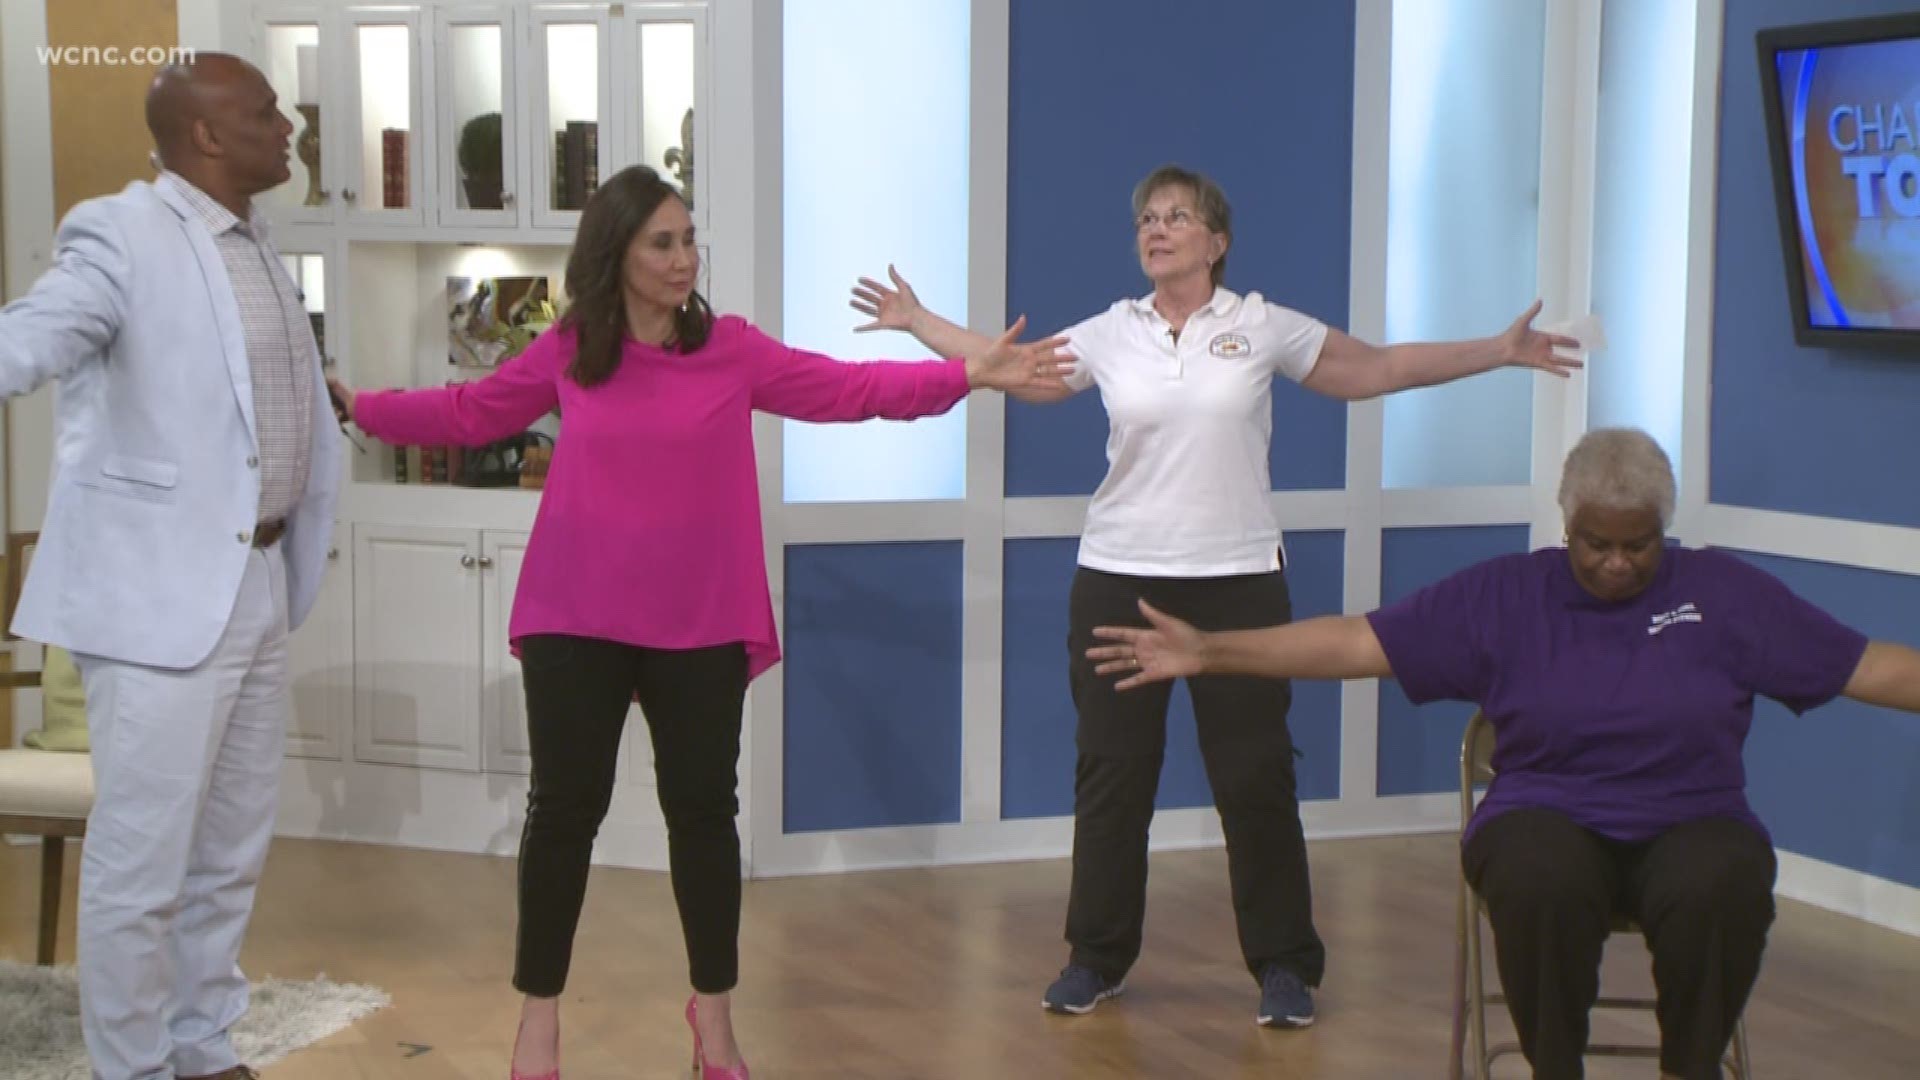 Kathy Joy from body and soul fitness shows you how to get ready for activity